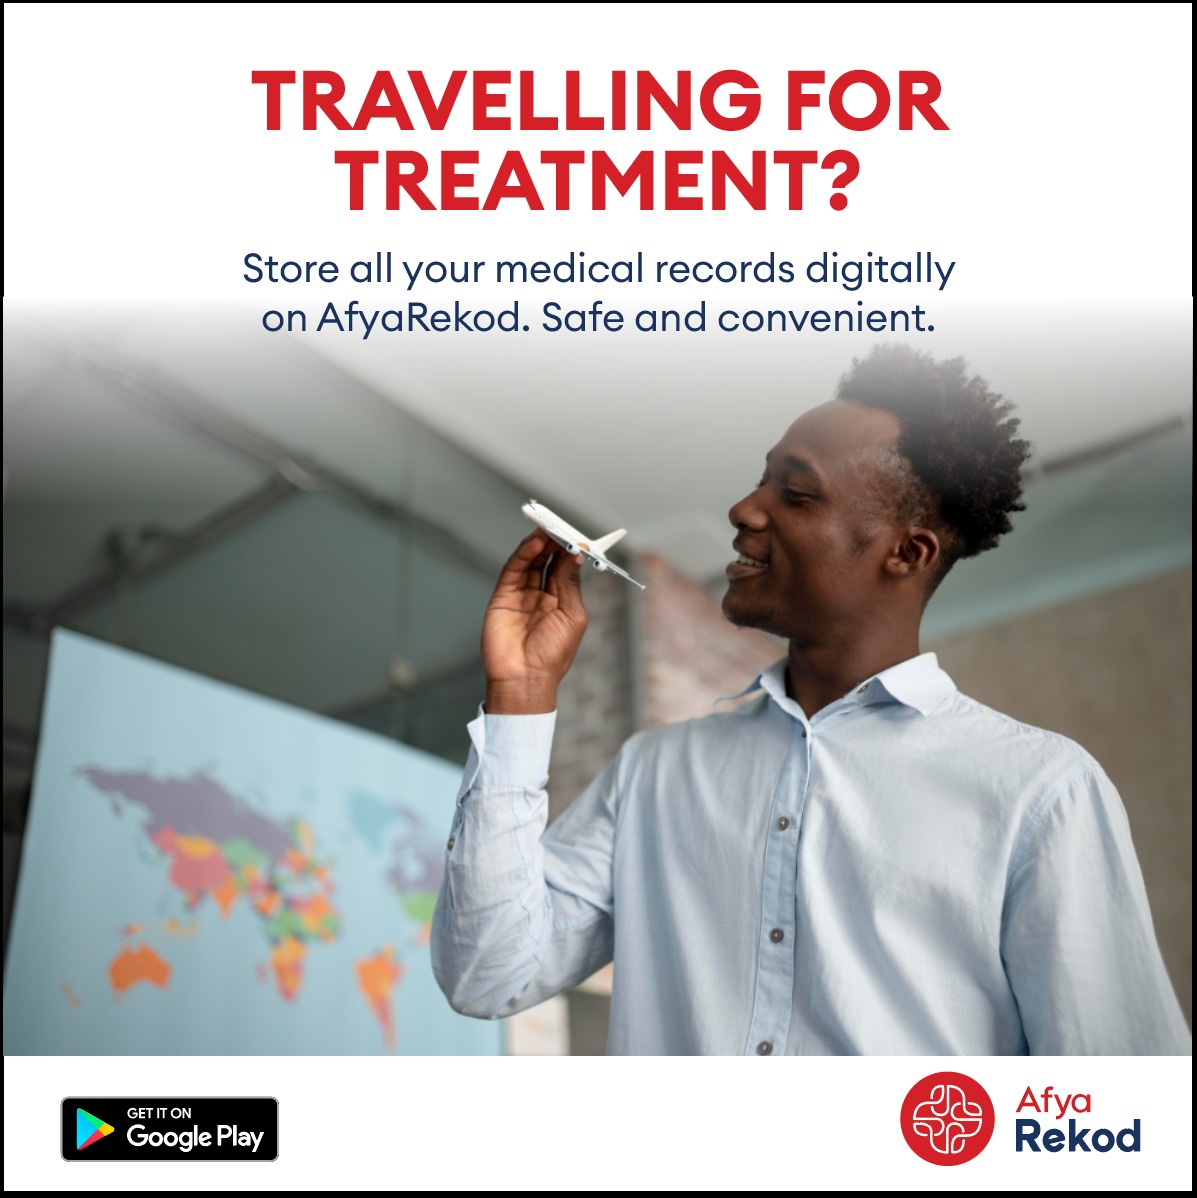 Need to fly out for treatment? Then you definitely need to download the AfyaRekod app. AfyaRekod allows you to store and manage all your health records safely. No lost or forgotten files story here,you got it sorted with AfyaRekod! Download today! #ownyourhealth